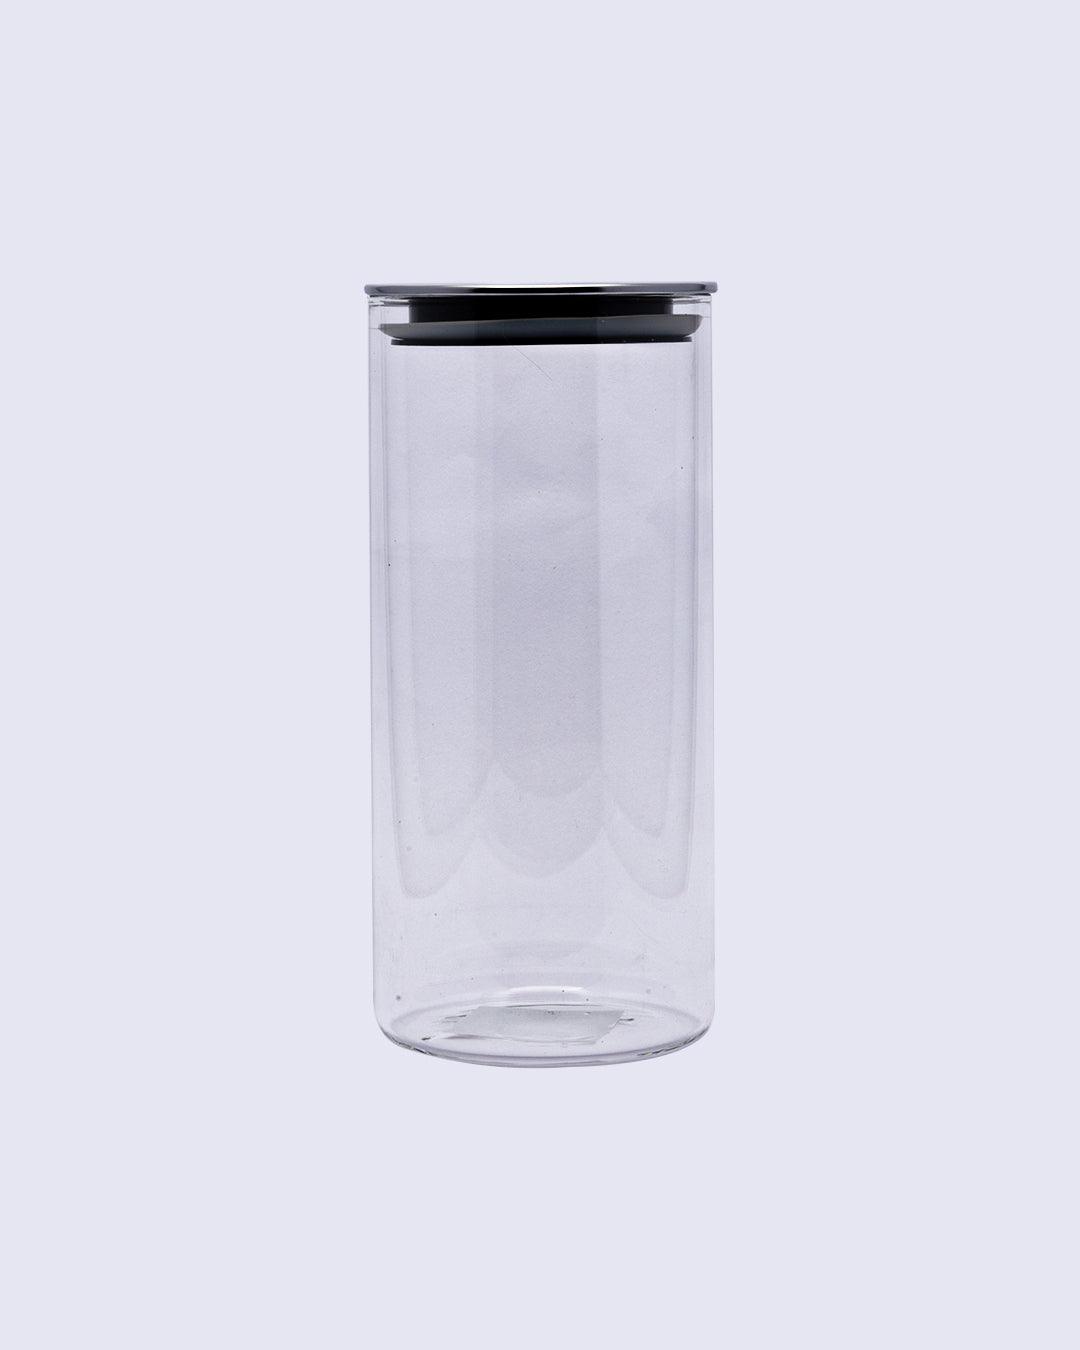 Glass Jar, with Lid, Storage Container, Transparent, Glass, 1.2 Litre - MARKET 99